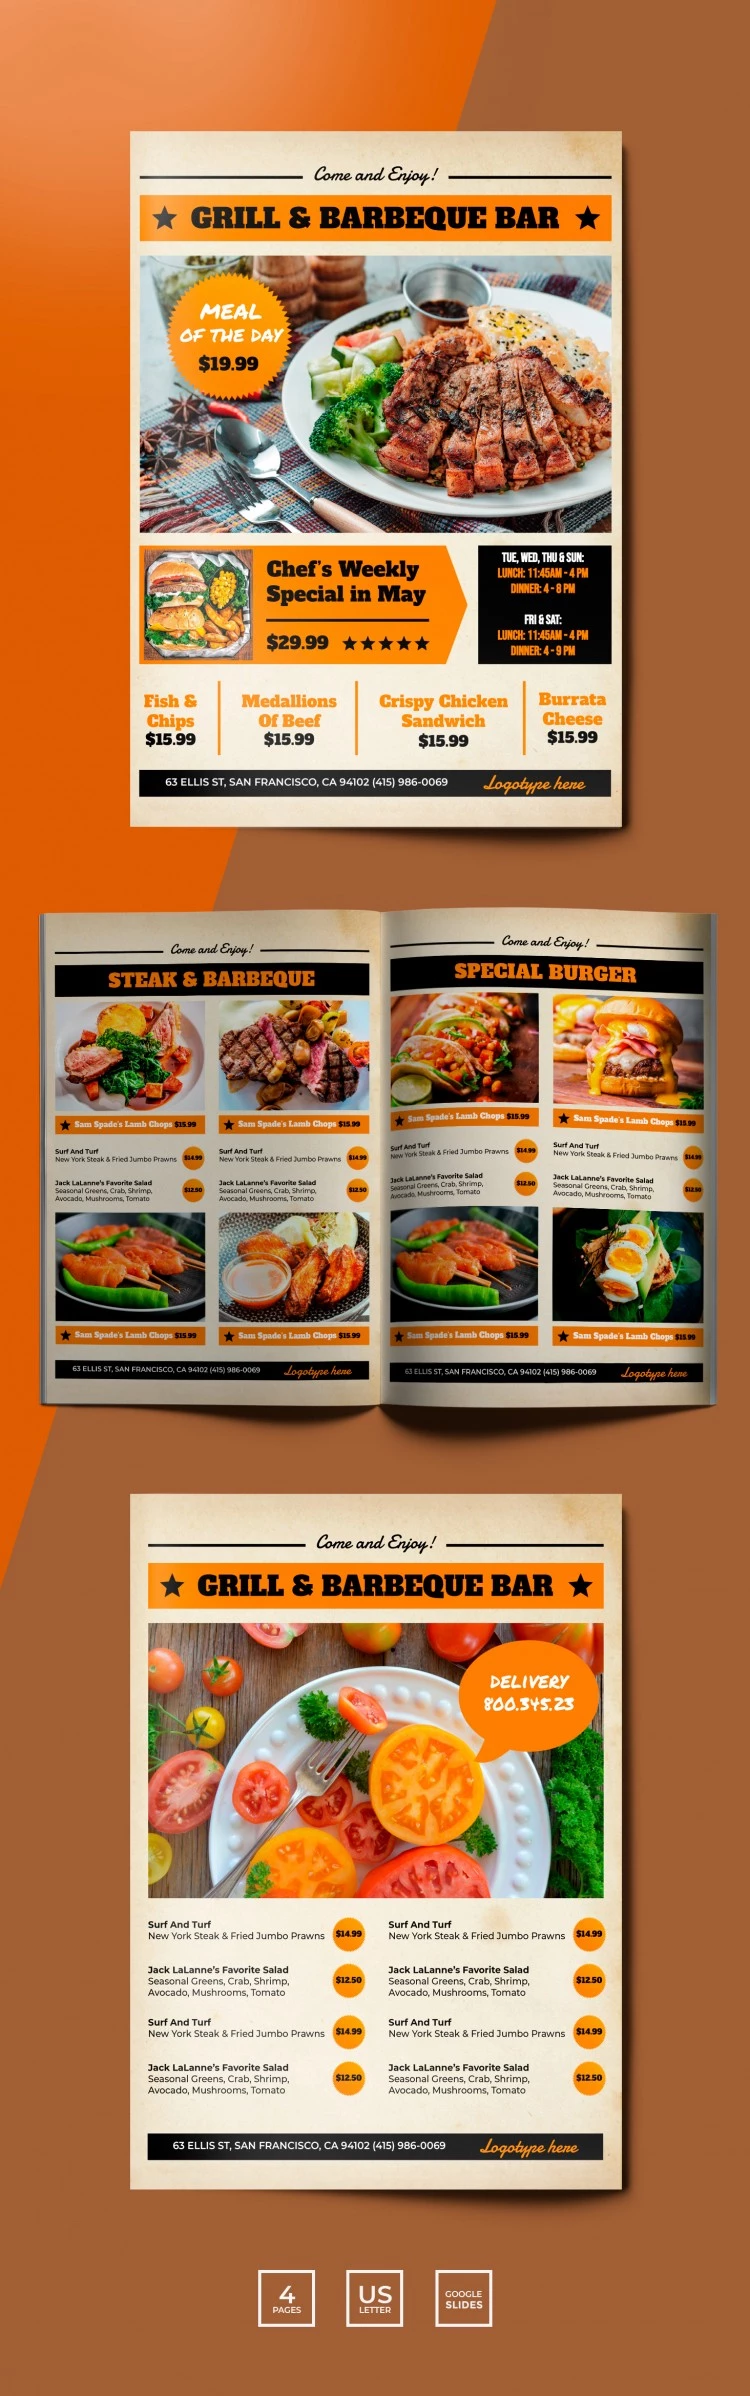 Grill and Barbeque Restaurant Menu - free Google Docs Template - 10066402